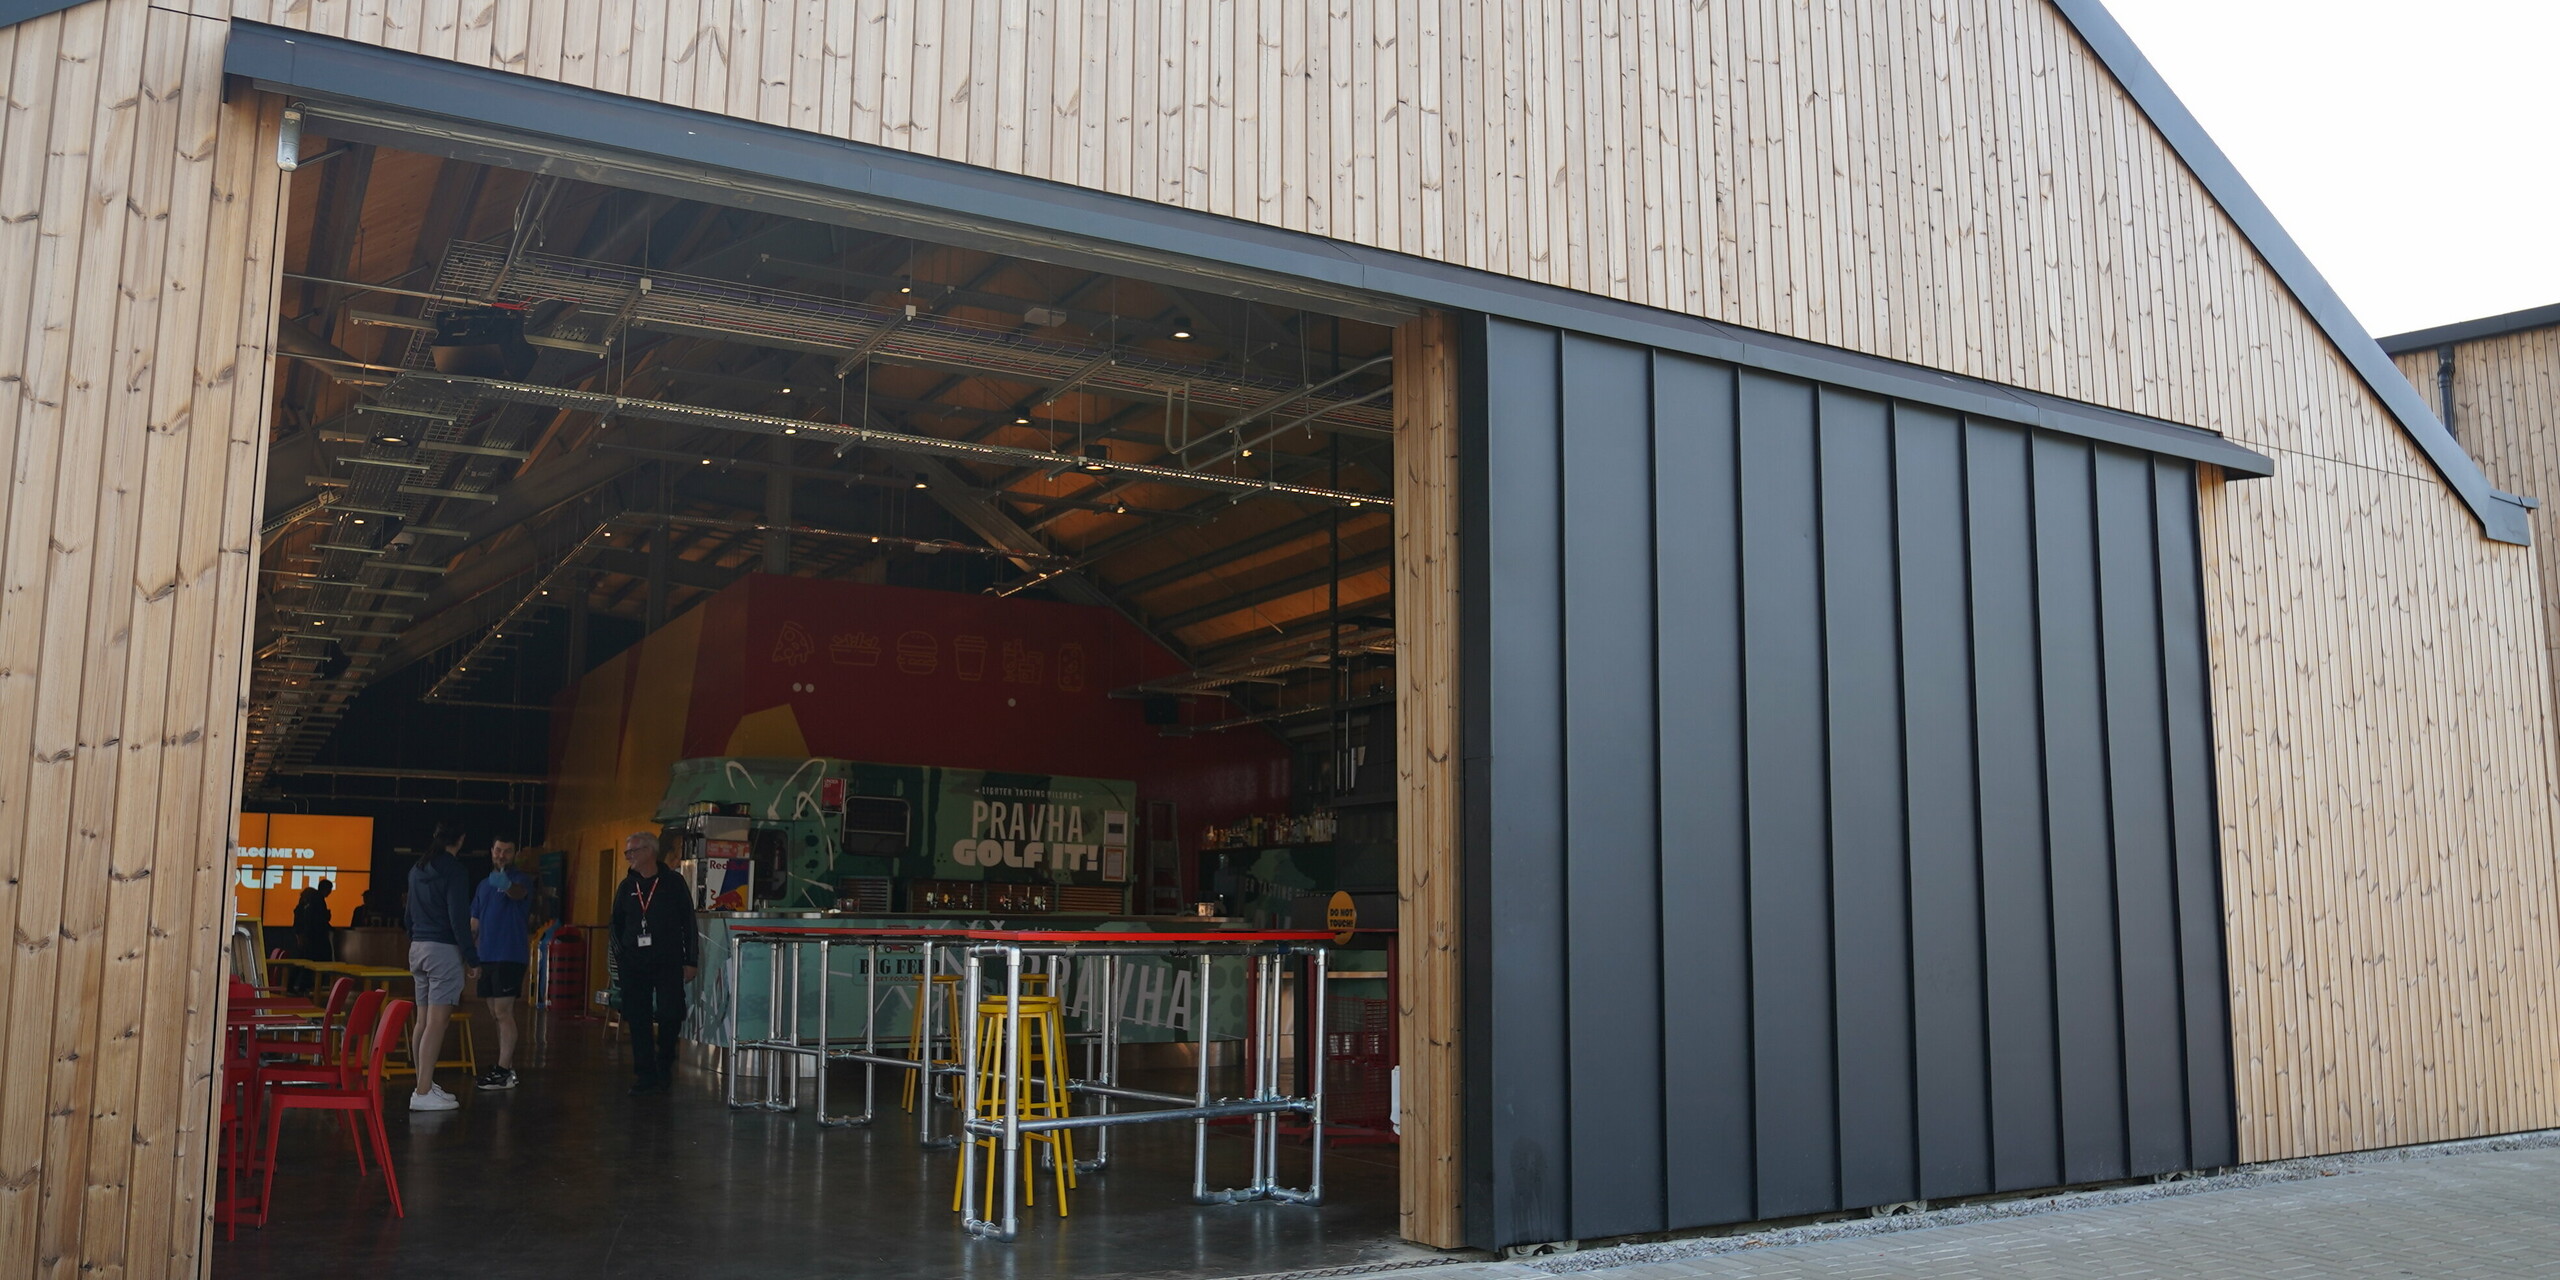 A view of the open entrance area of the "Golf it!" facility in Glasgow, Scotland. The construction demonstrates the versatile use of PREFALZ in P.10 black. The large sliding door is framed by a wooden façade on the building. Inside, a lively atmosphere with colourful seating and bar tables invites people to linger. The flexible aluminium was used in this project on around 2,000 square metres of roof area, on the large sliding doors and parts of the façade, creating a harmonious appearance.